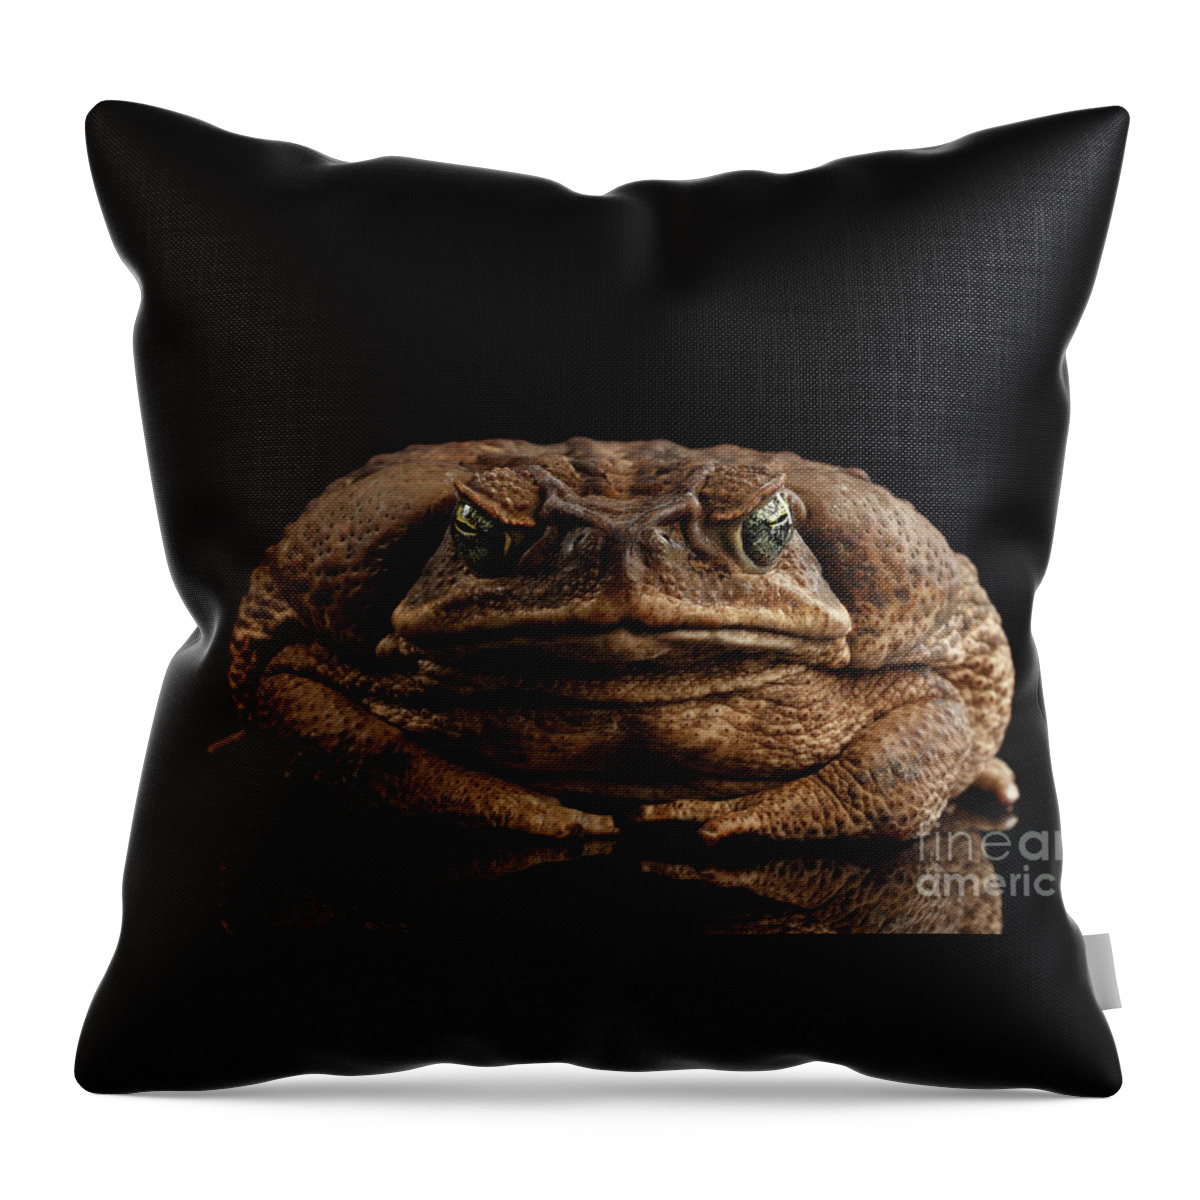 Toad Throw Pillow featuring the photograph Cane Toad by Sergey Taran